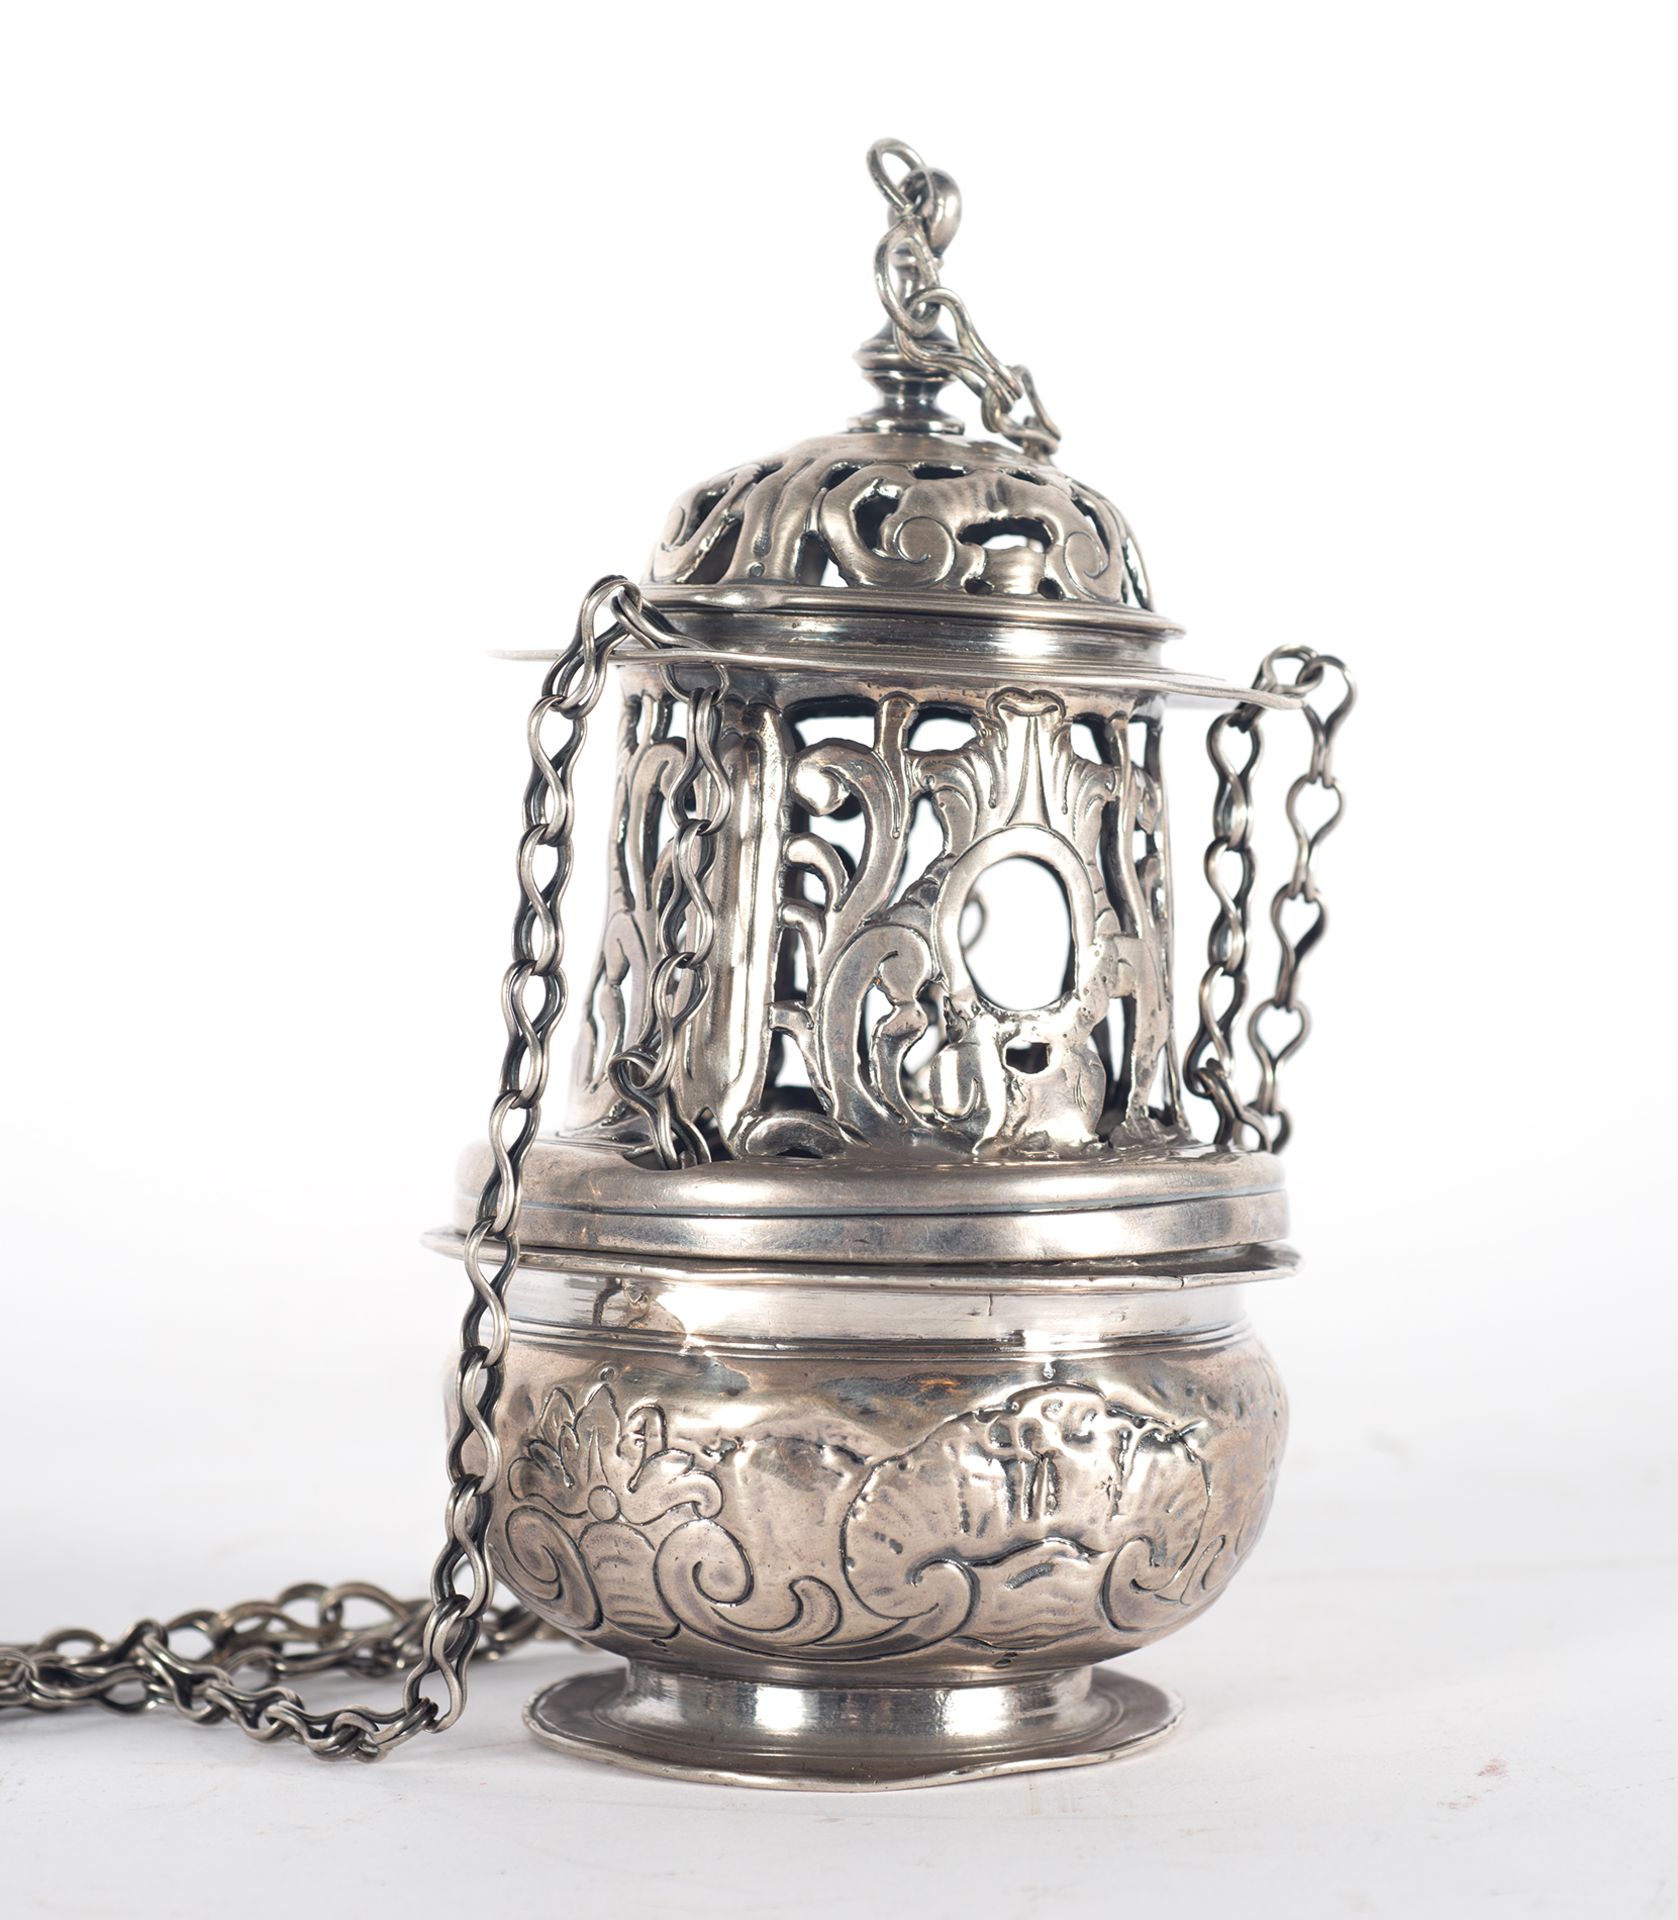 Colonial silver censer, Cuzco, 17th - 18th century - Image 2 of 5